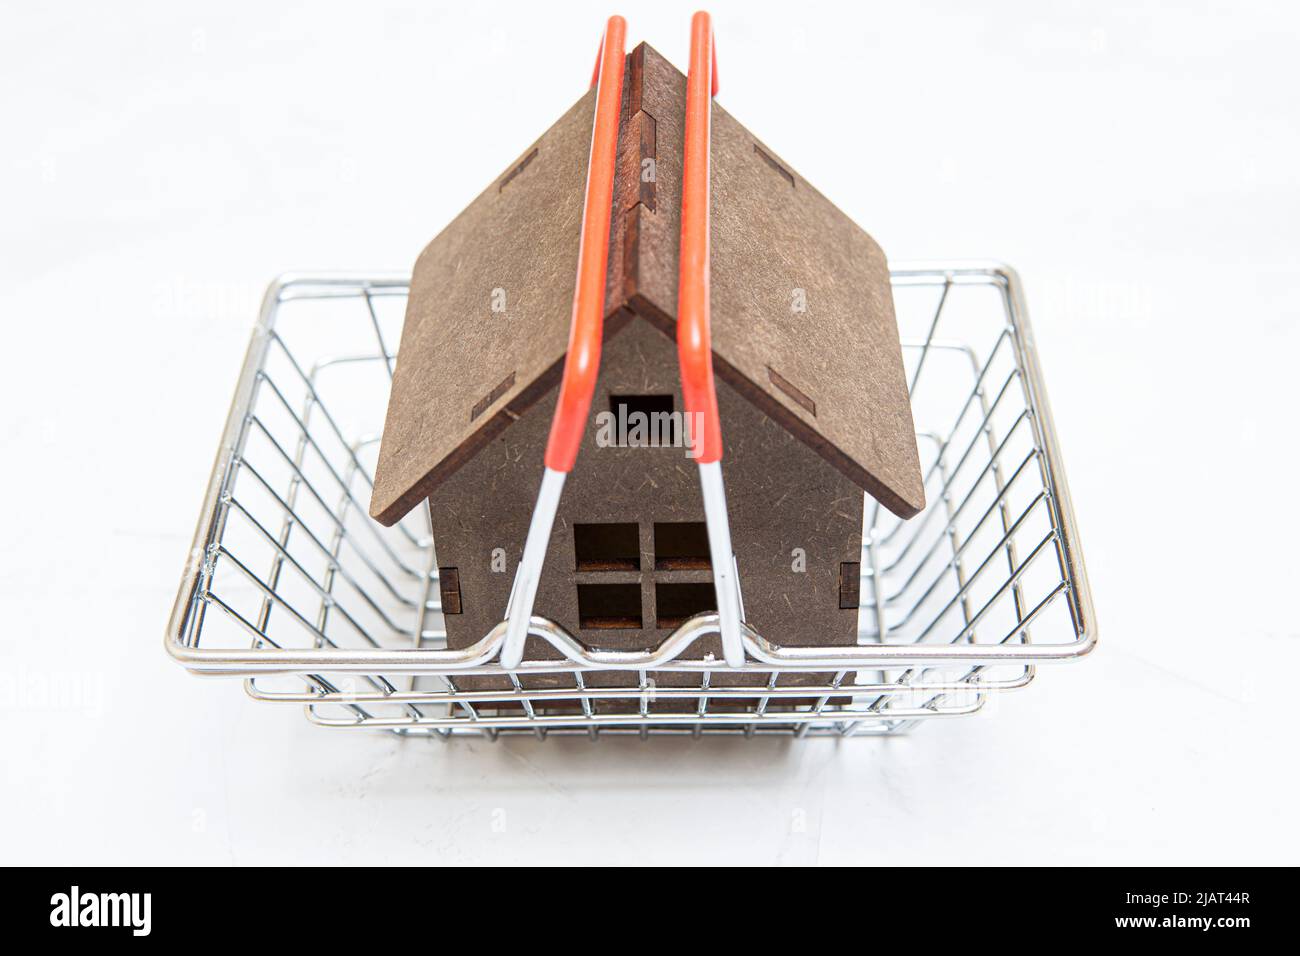 Toy wooden house in a shopping cart on a neutral background. Stock Photo